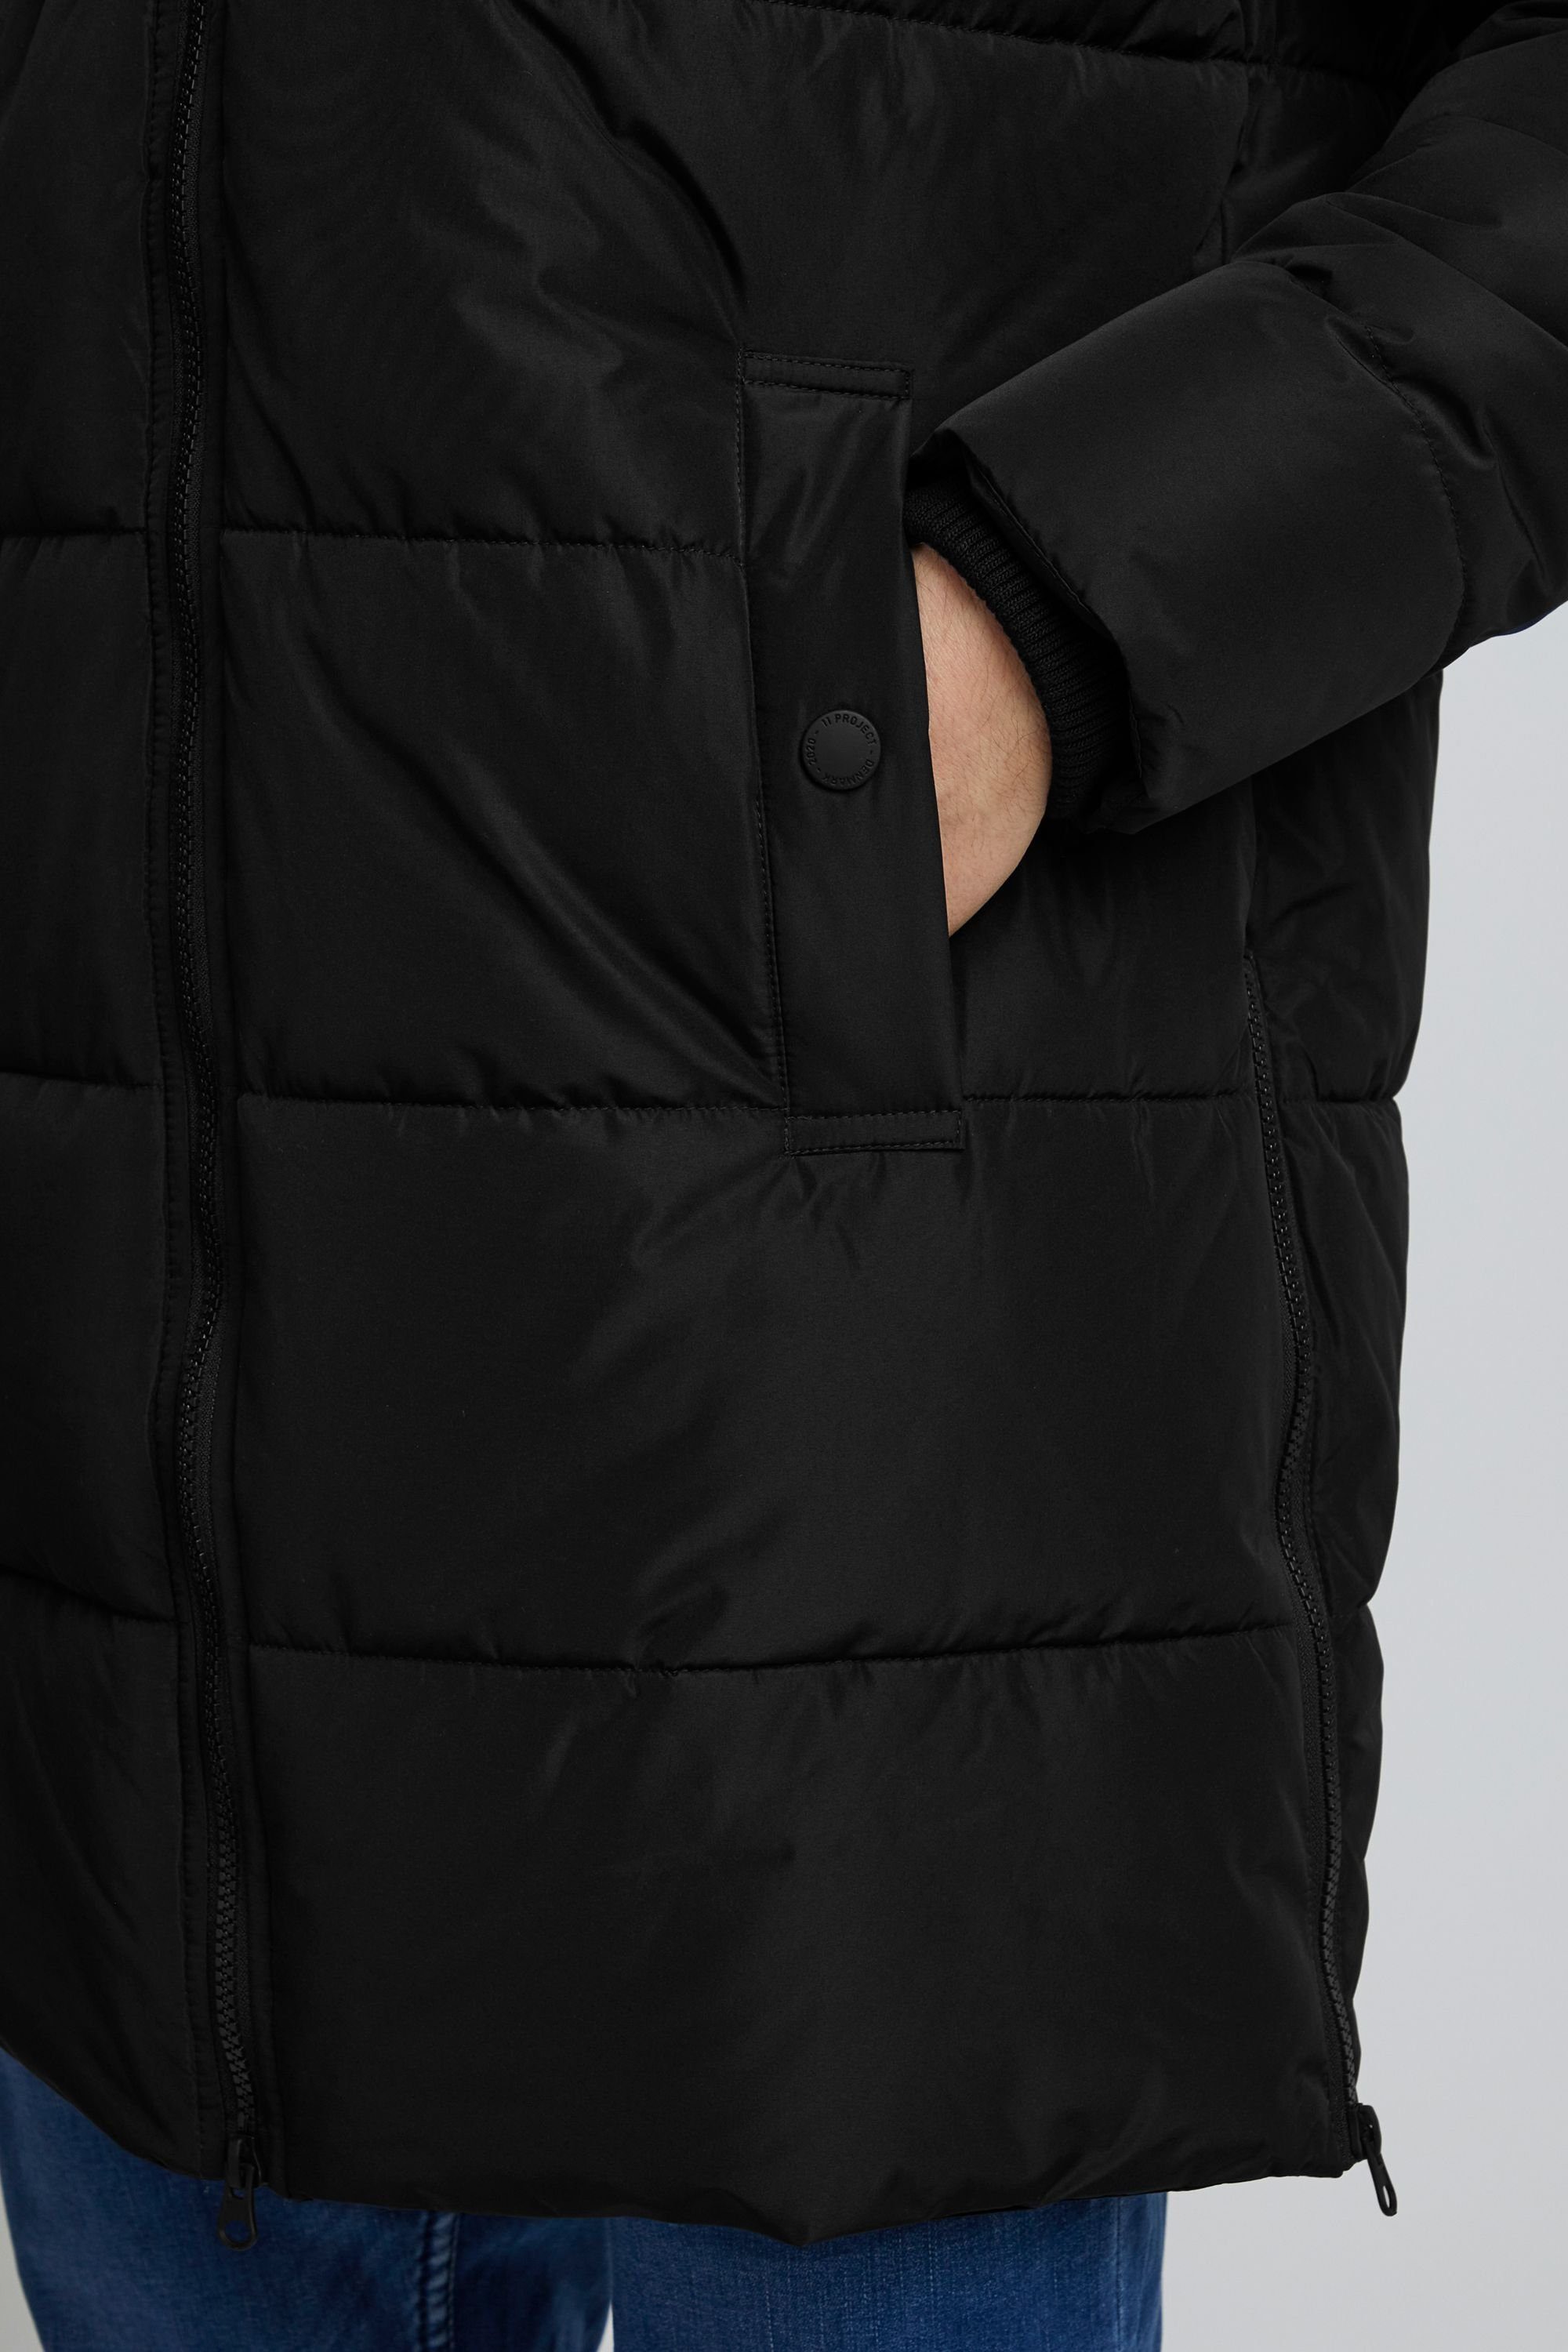 quilted Project Parka 11 Parka Tibor Black Long Project 11